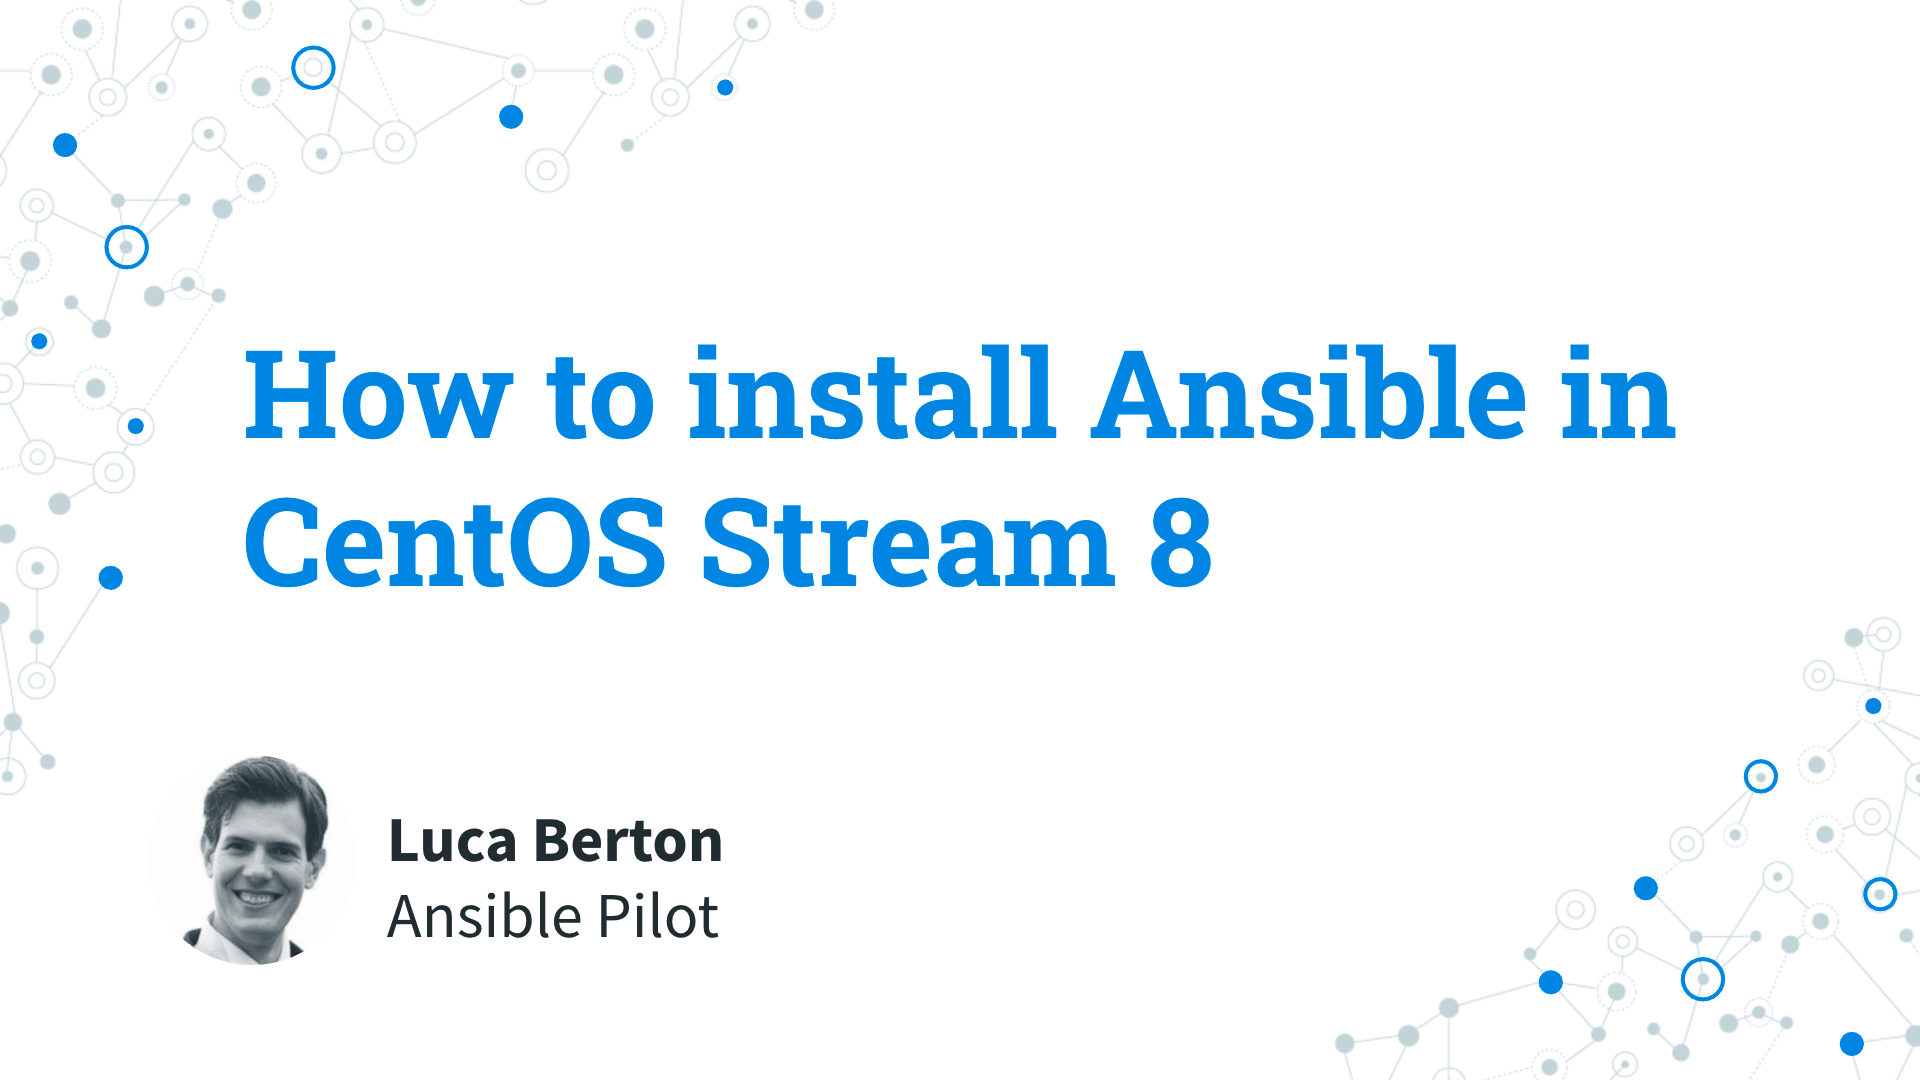 How to install Ansible in CentOS 8 Stream - Ansible install